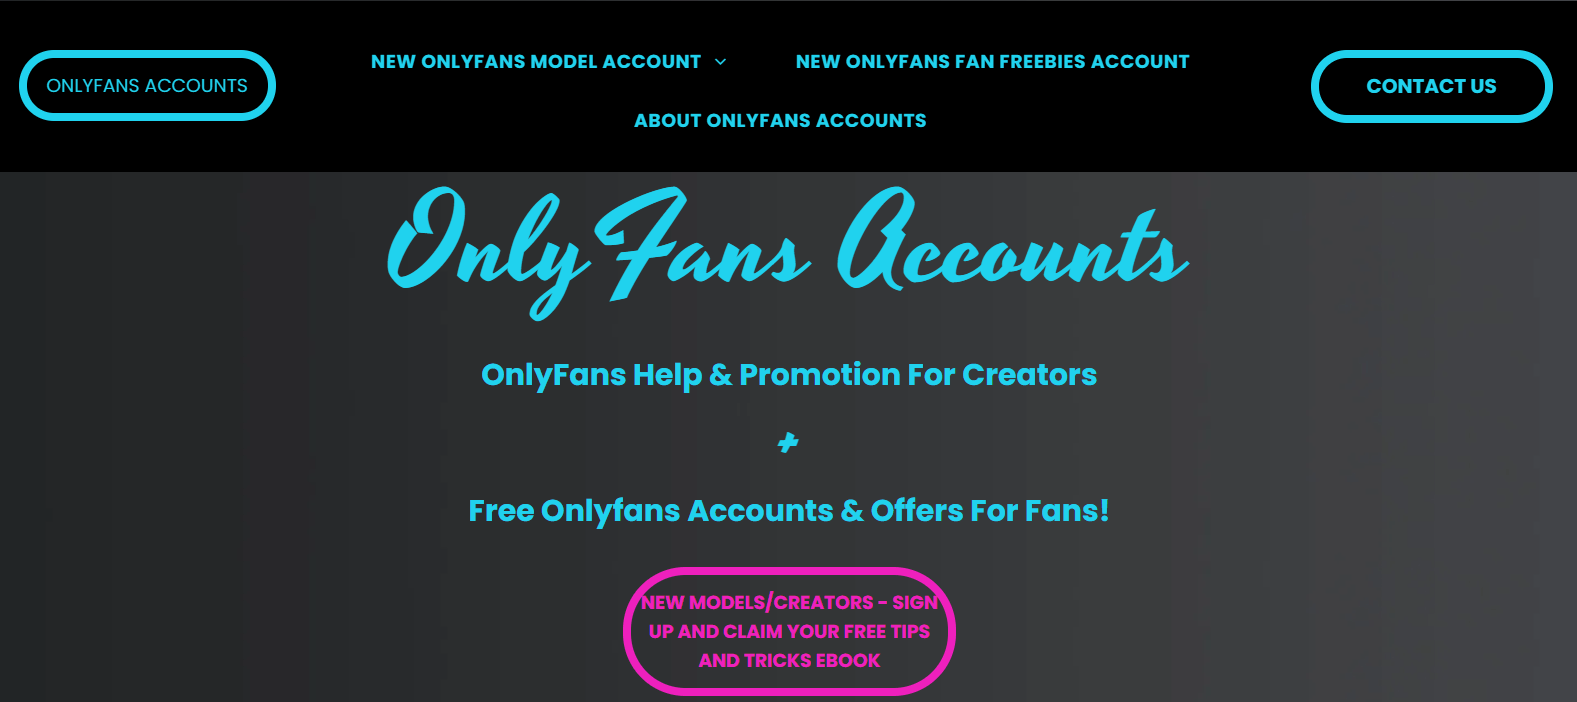 Onlyfans with free trials